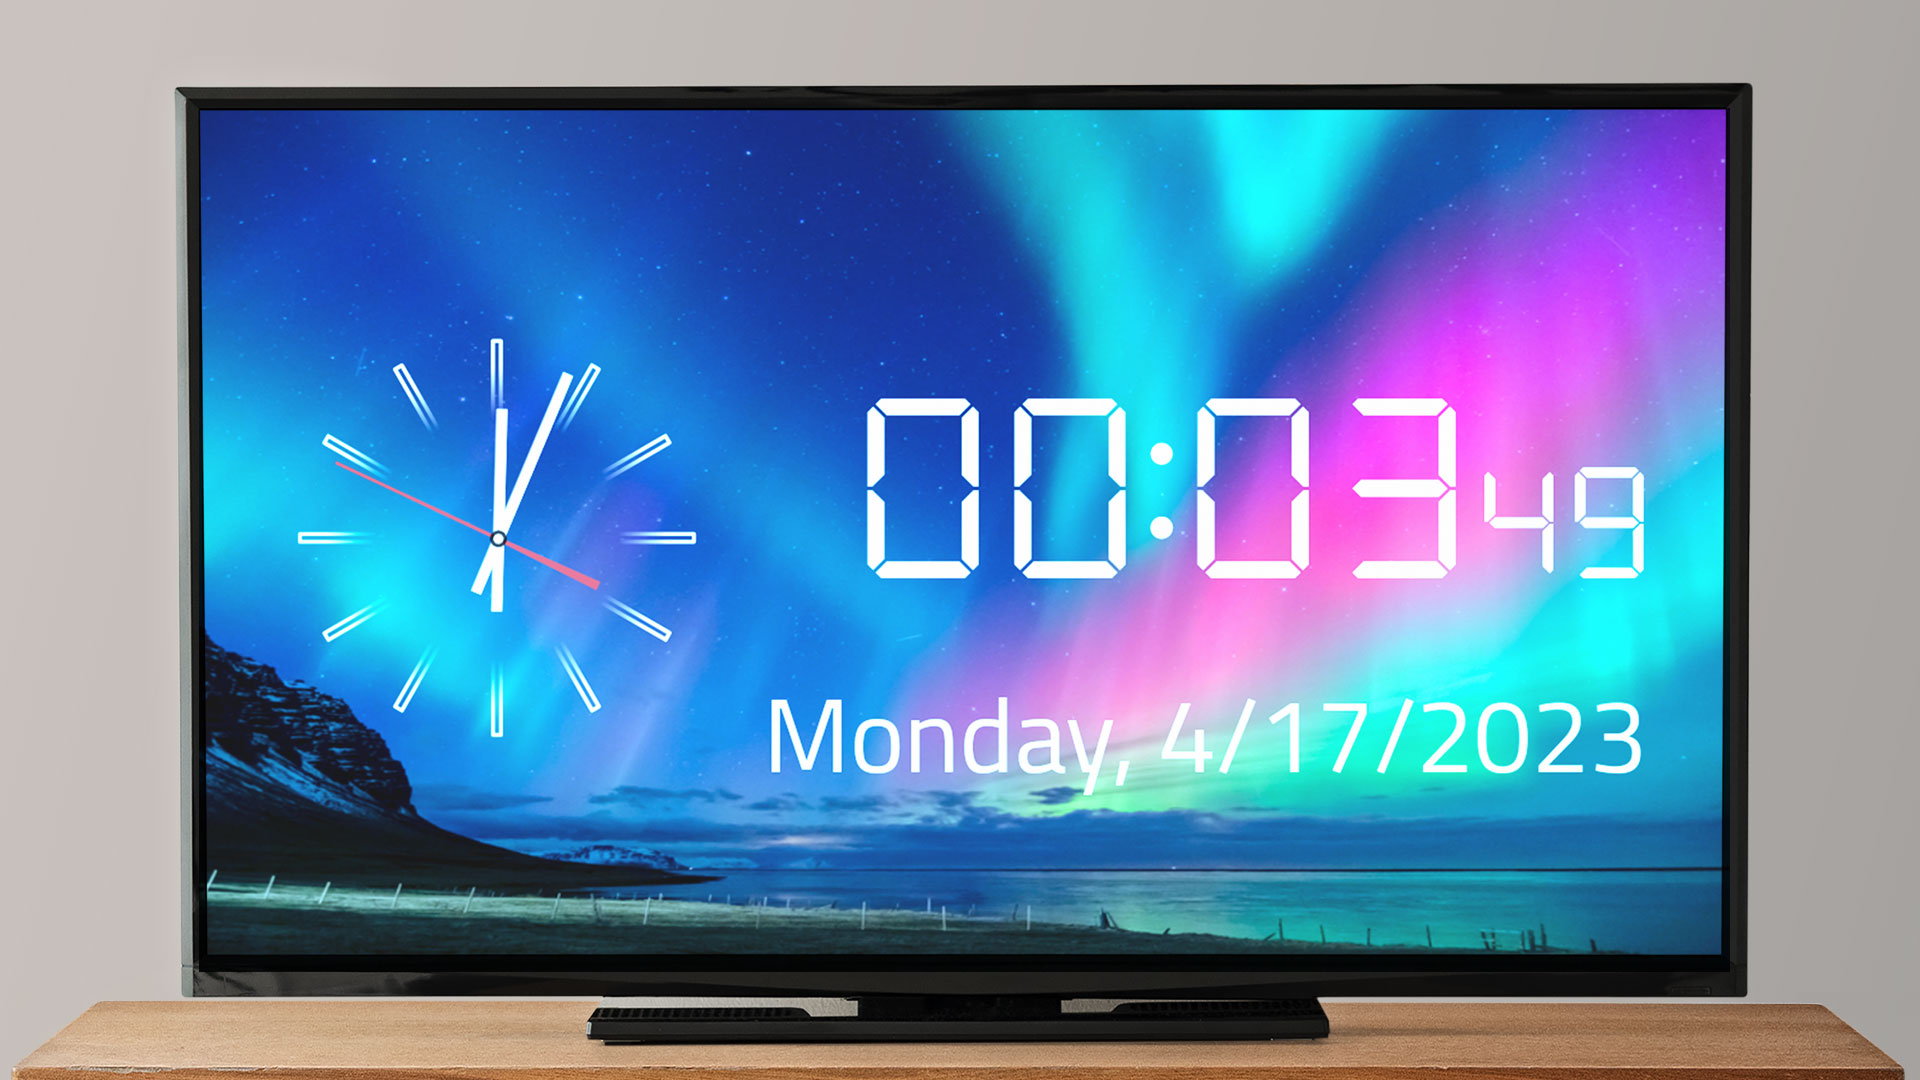 Aurora Borealis And Northern Lights HD Clock: Analog and Digital Clock Screensaver for Fire TV and Tablet - NO ADS